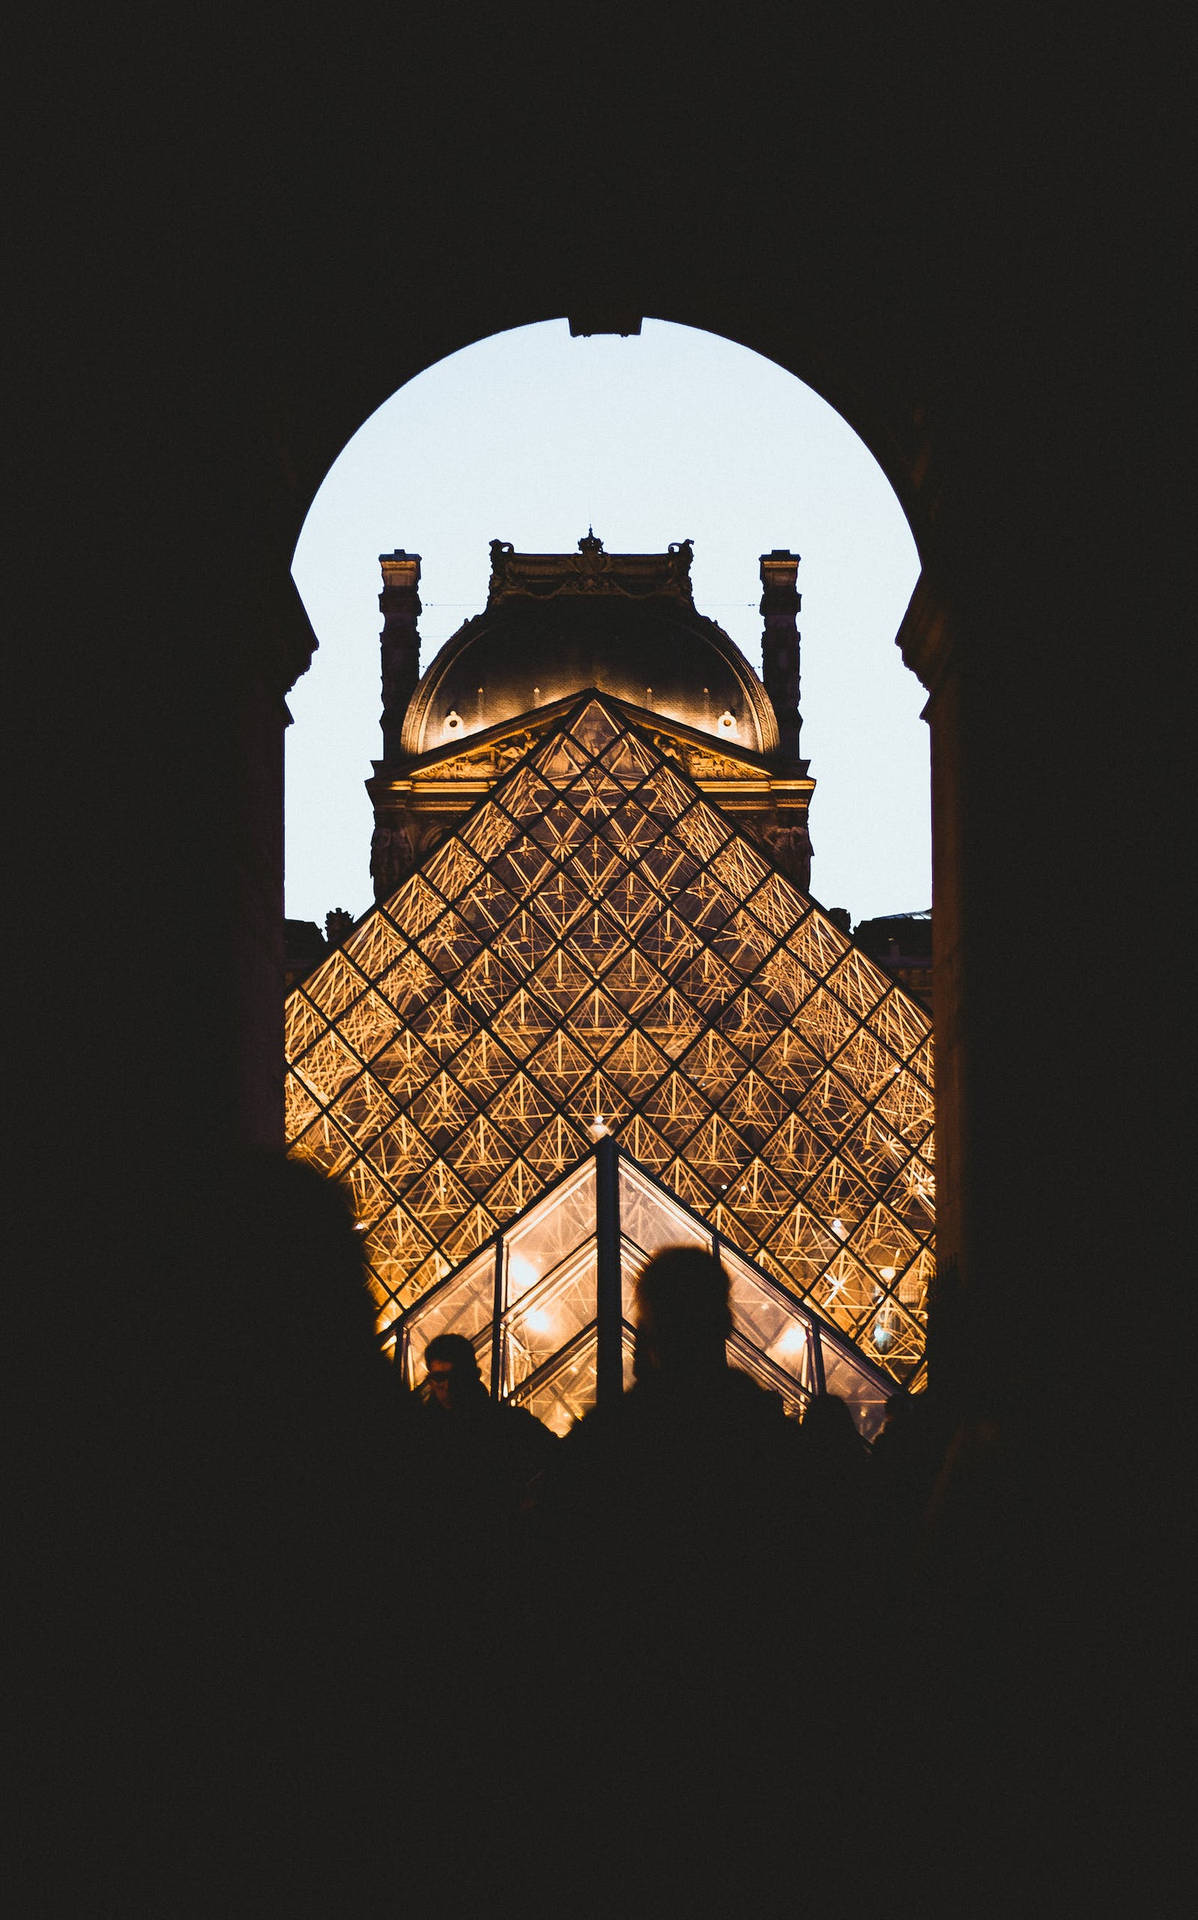 Louvre Museum In France Iphone Wallpaper